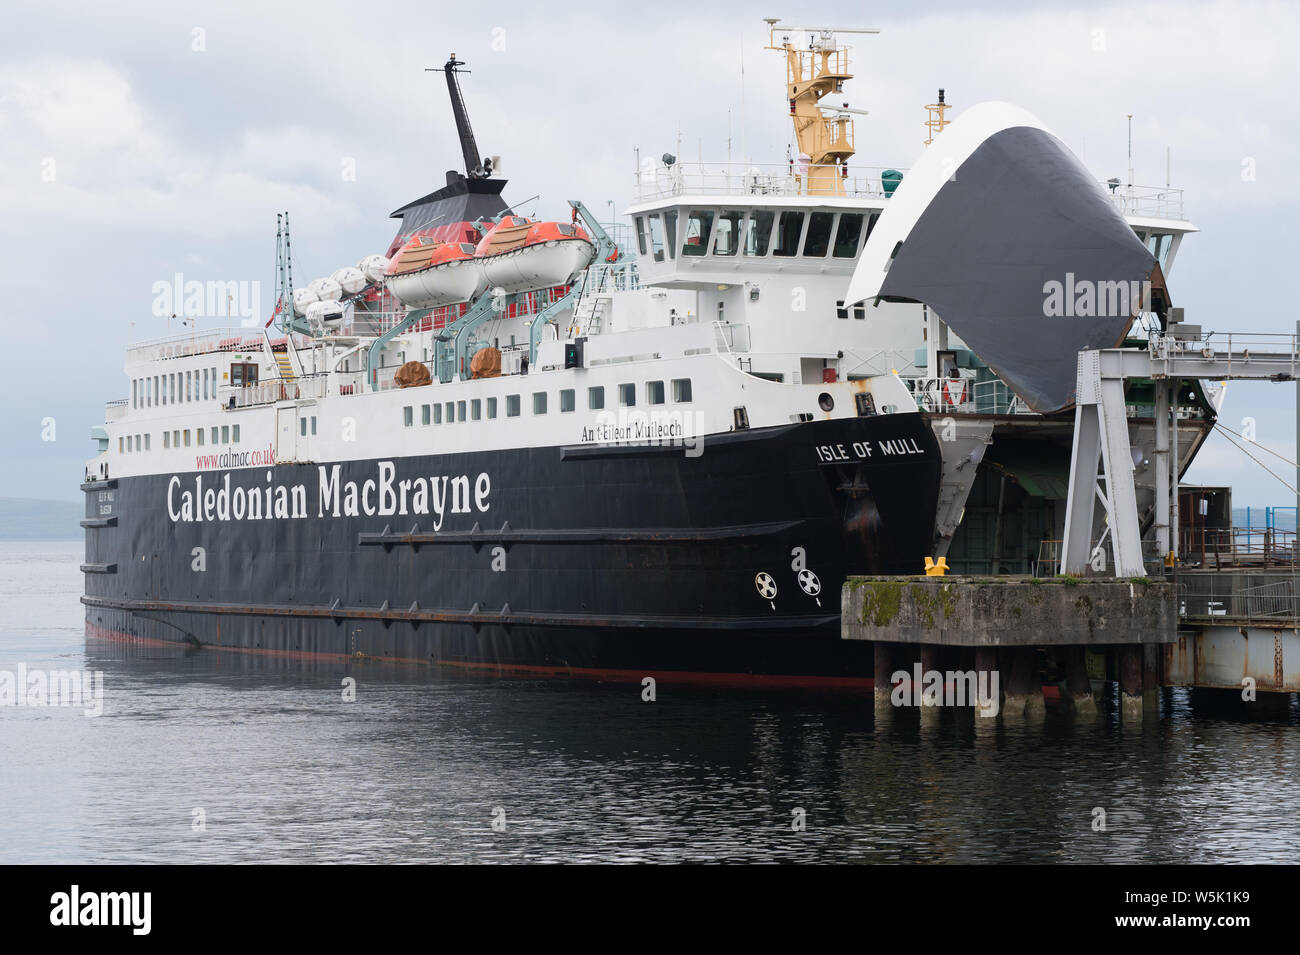 Caledonian Macbrayne ferry with open bow door loading cars at a Craignure port on the Isle of Mull, Scotland. Ferry was travelling to to Oban. Stock Photo